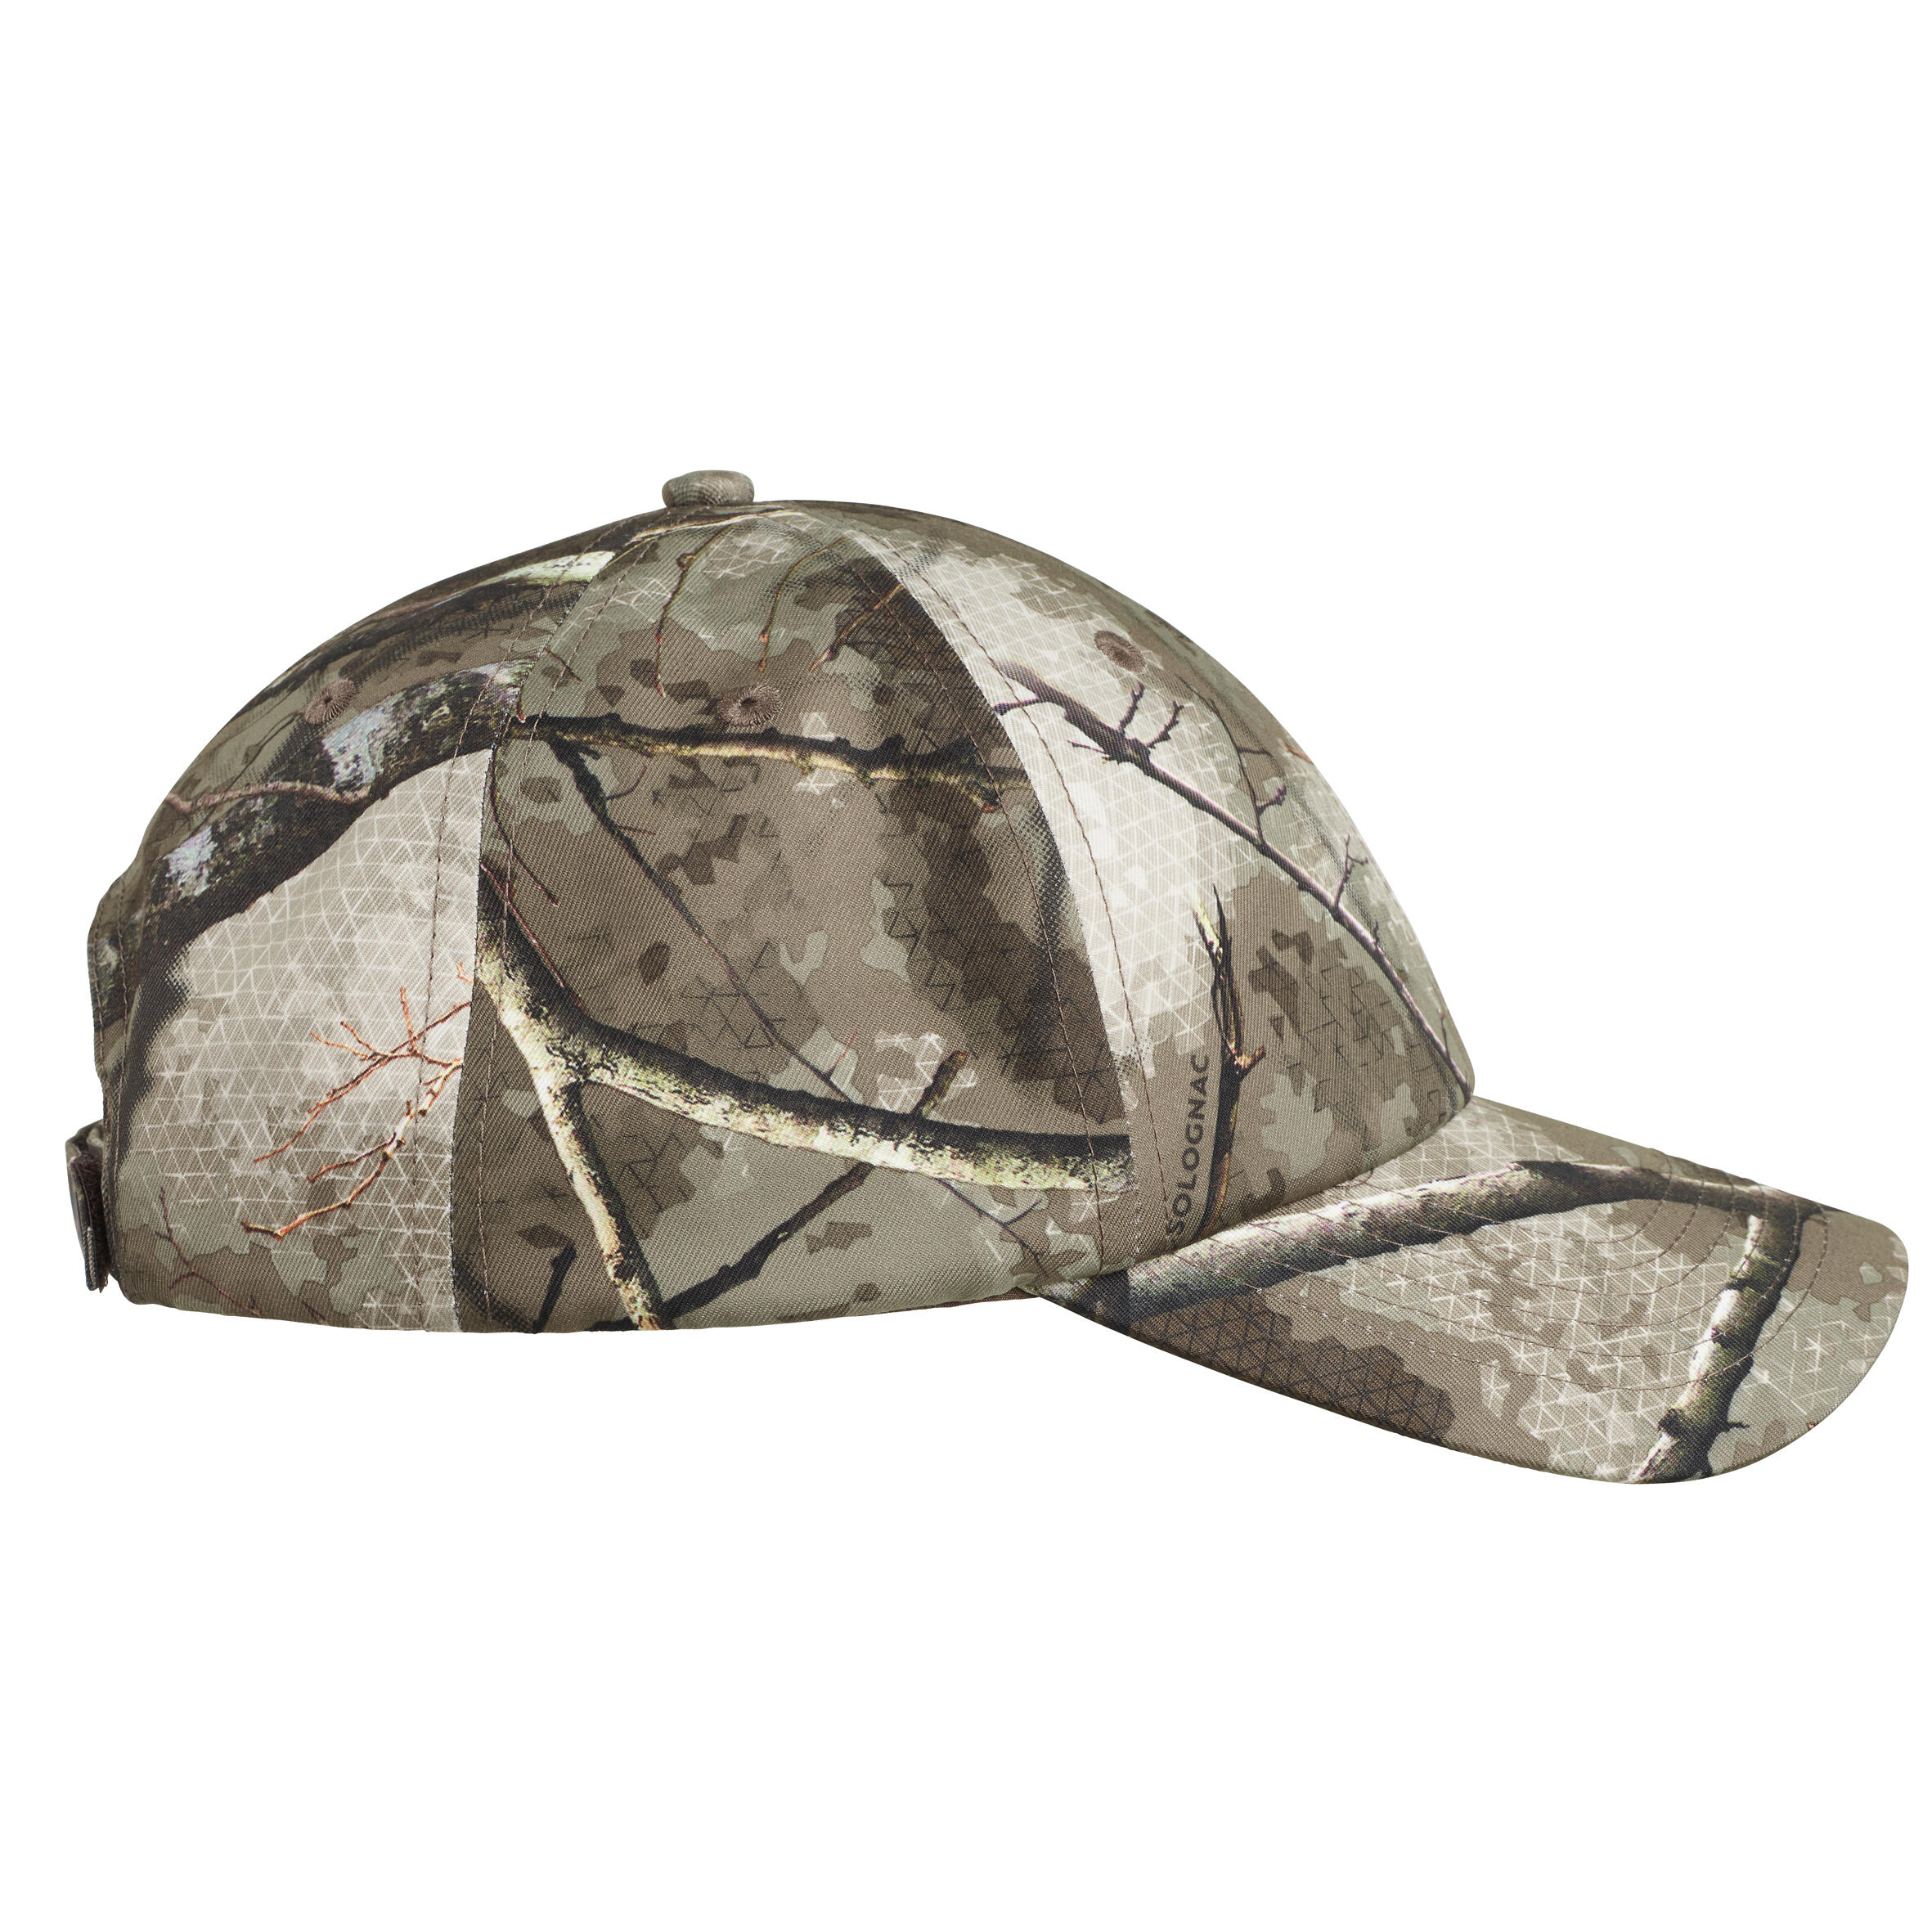 Spring Cotton Sun Caps Fishing Hat For Men Baseball Cap Camouflage Military  Adjustable Hat Camo Hunting Outdoor Sports Caps